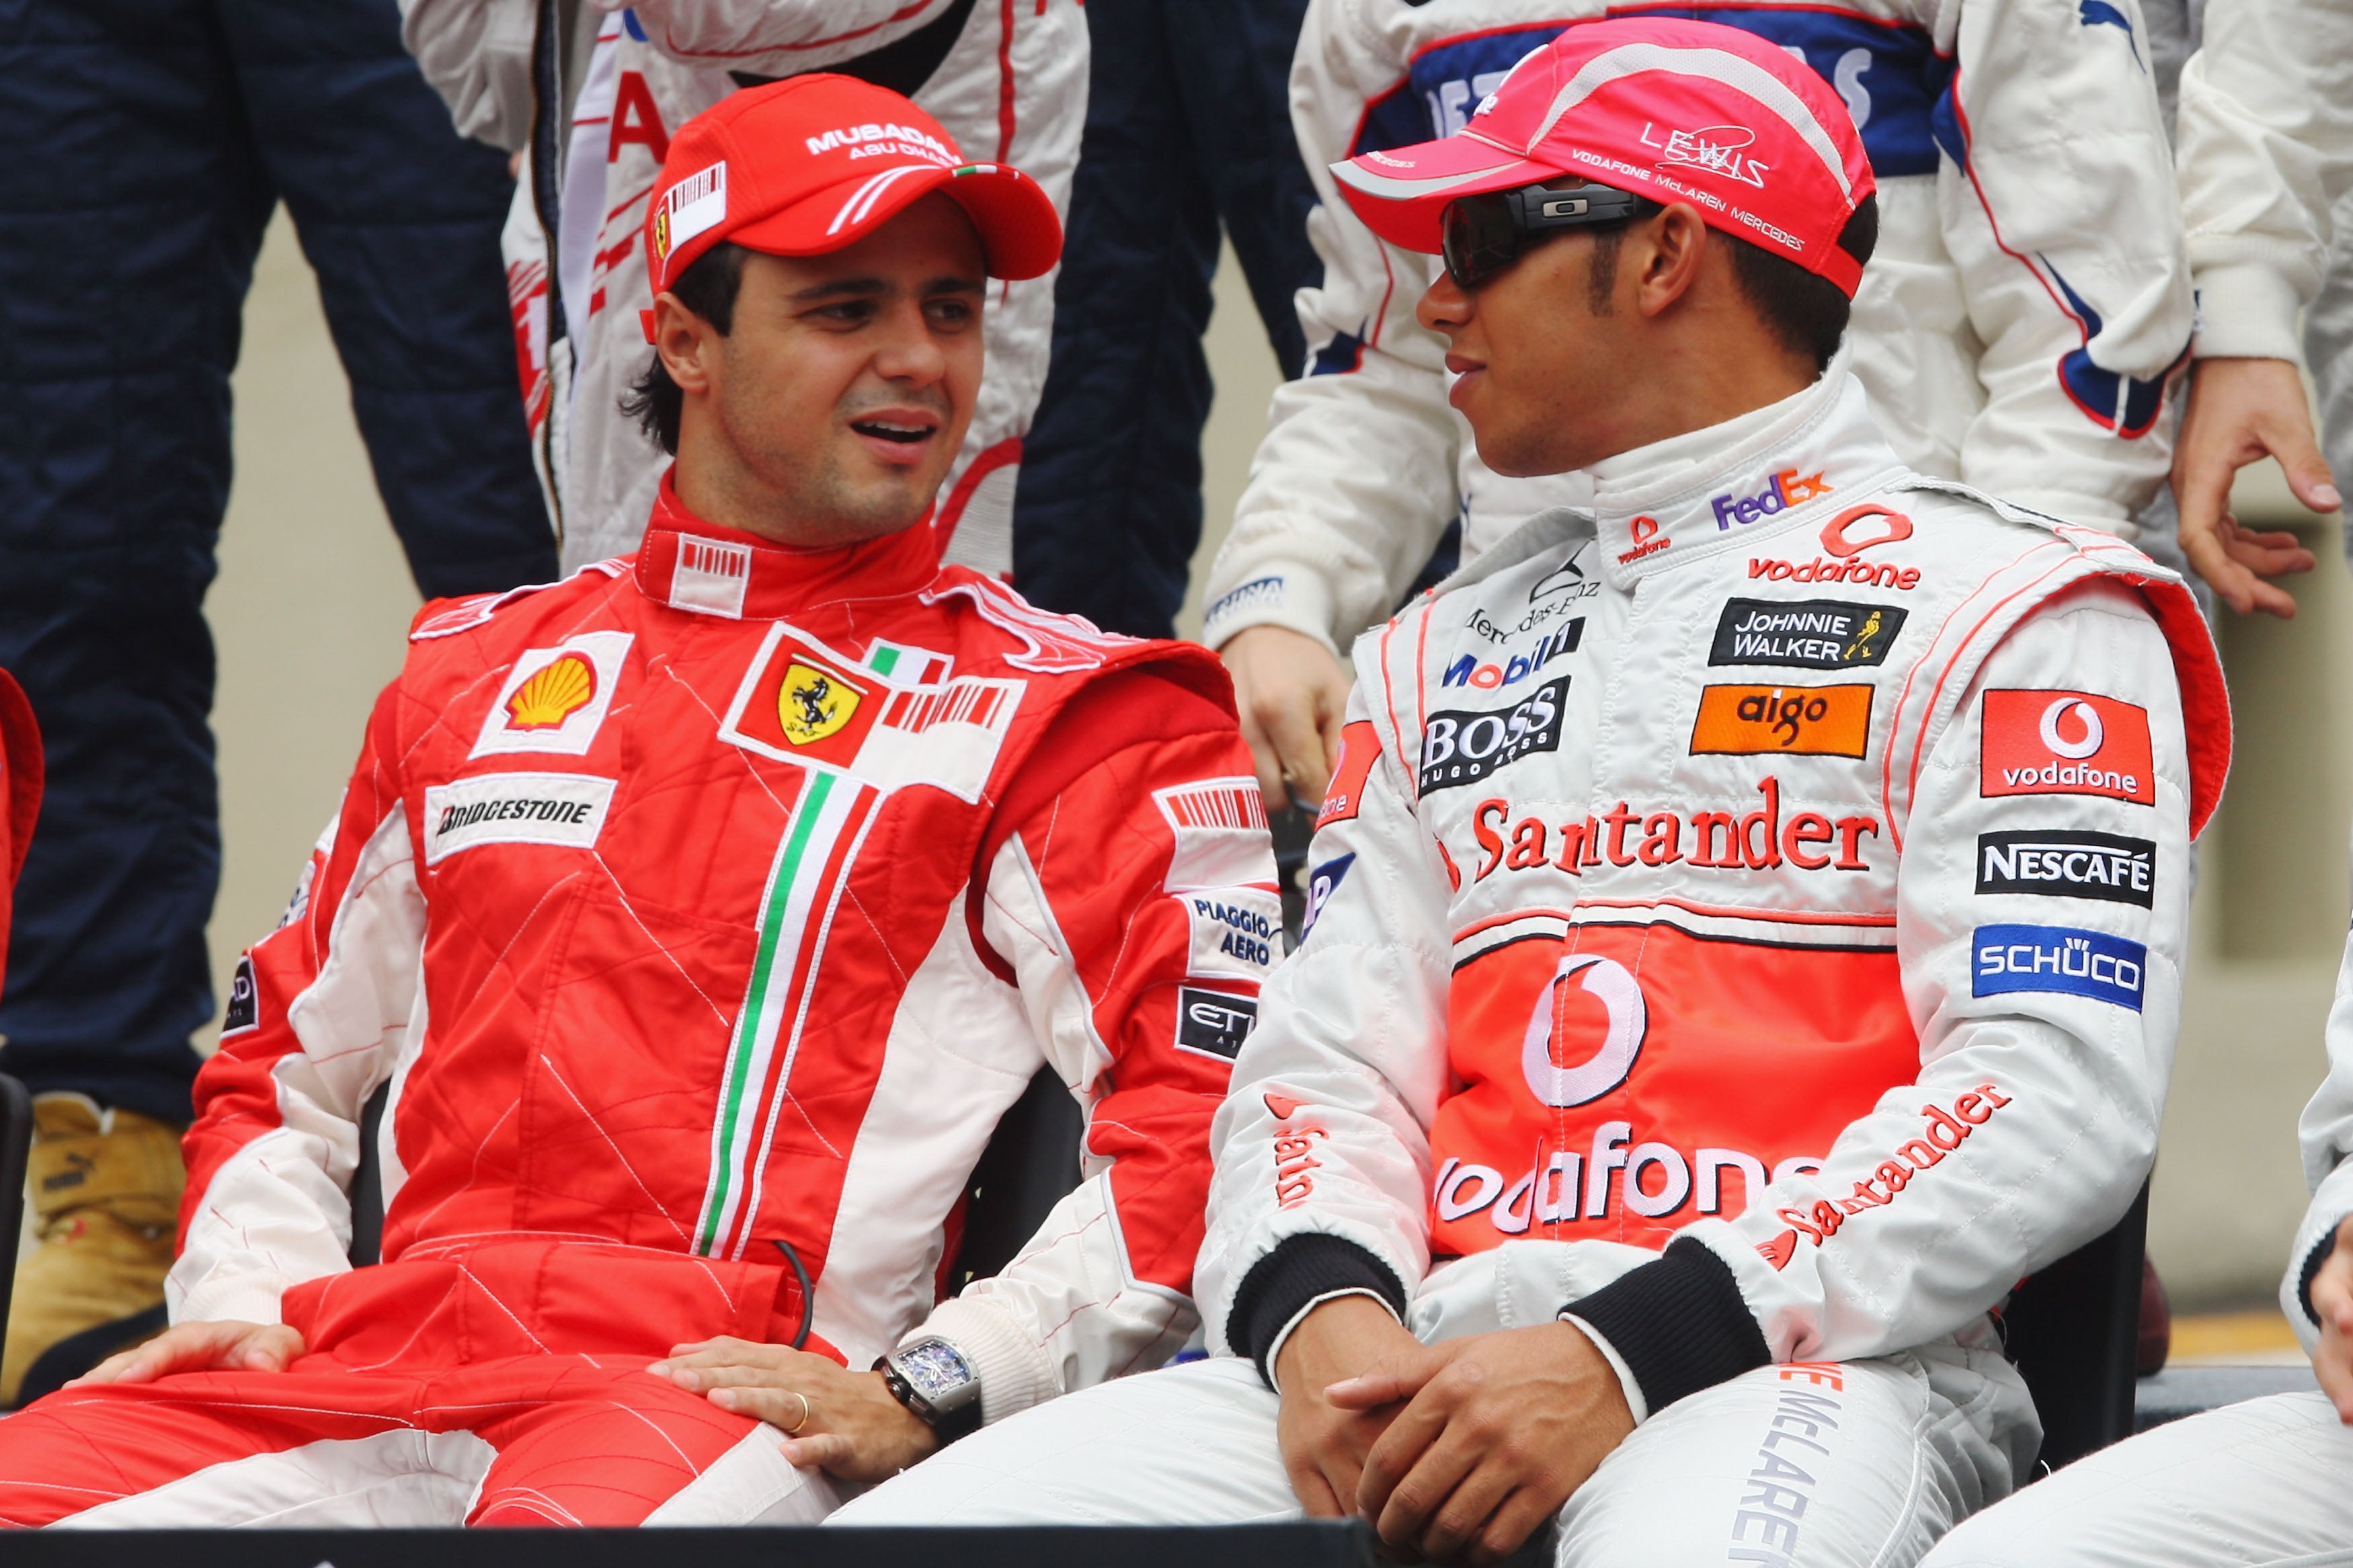 Felipe Massa’s lawyers have now started legal action over the 2008 F1 title loss to Lewis Hamilton